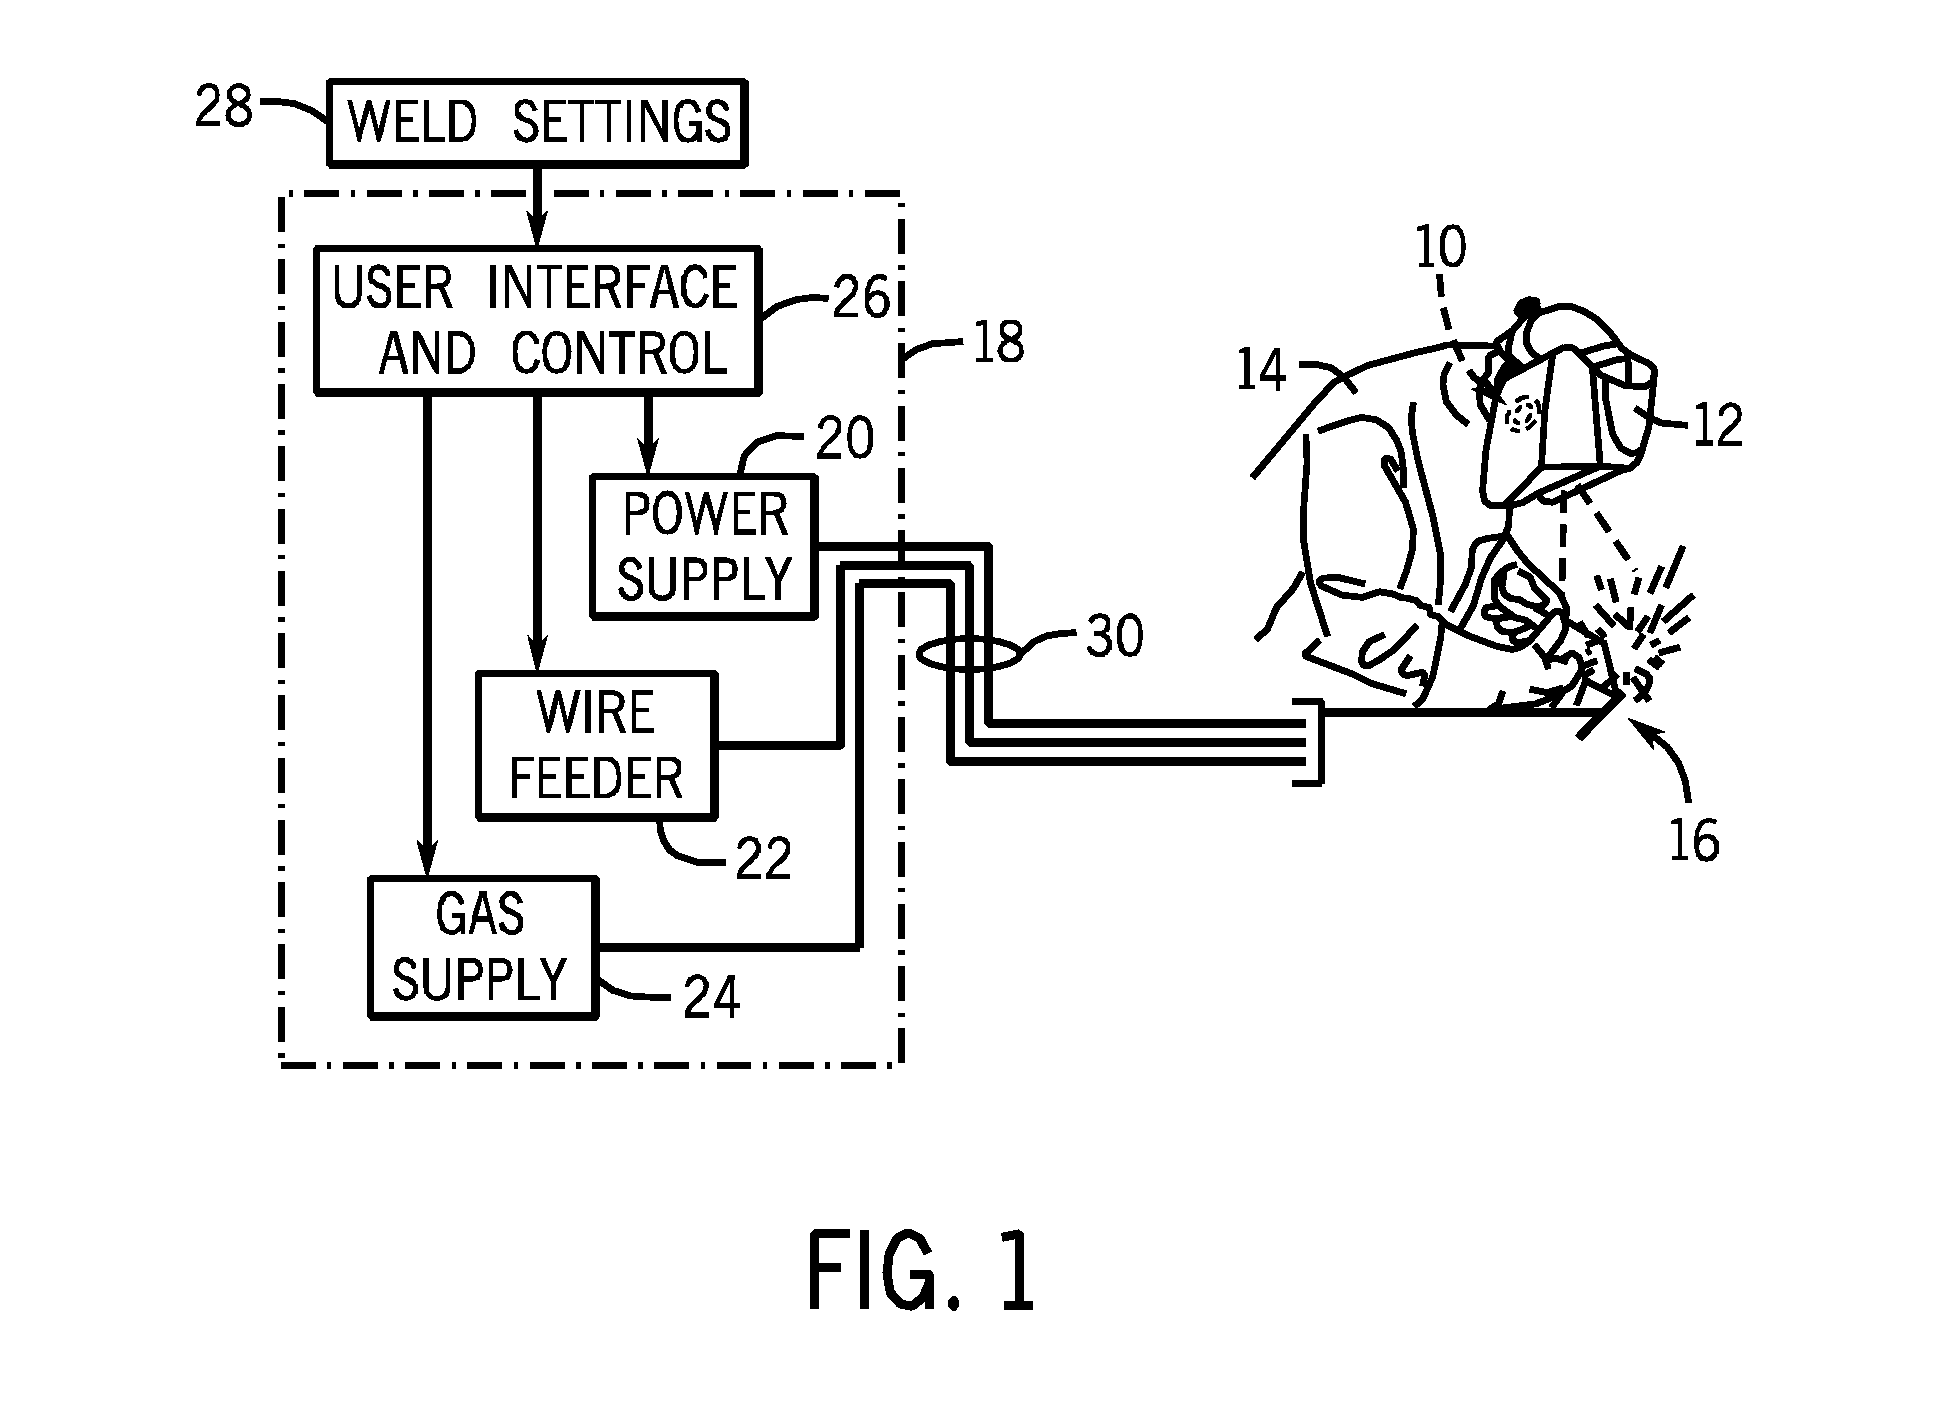 Welding helmet audio communication systems and methods with bone conduction transducers